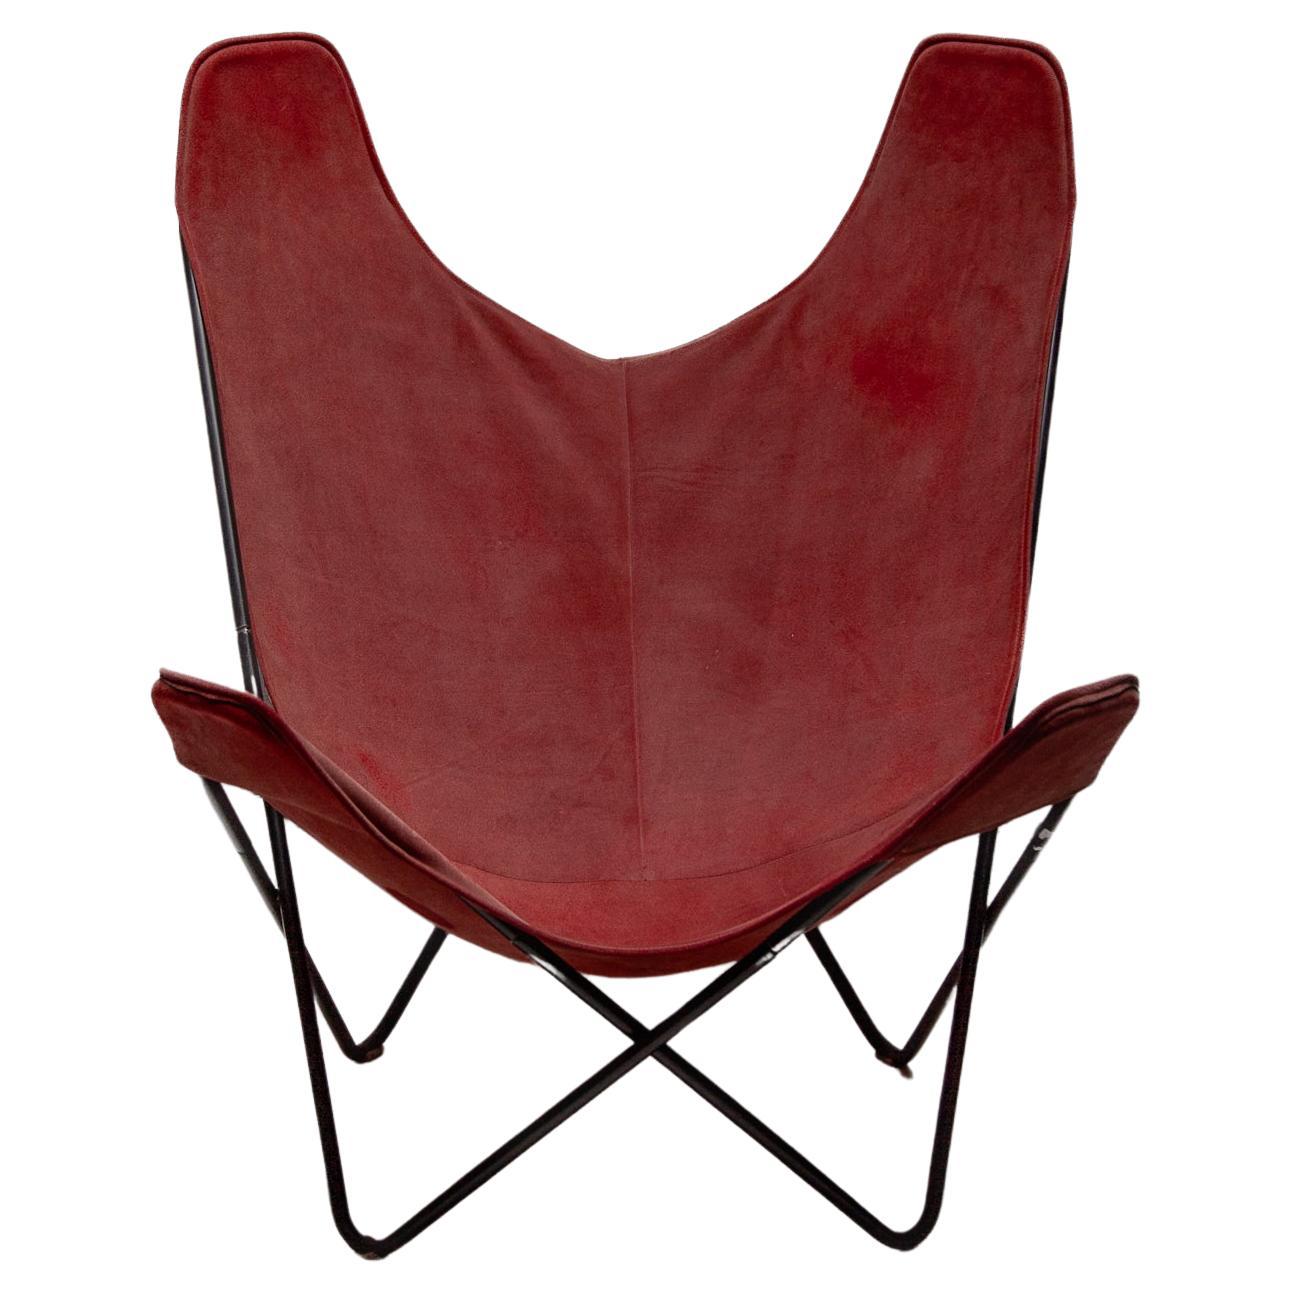 "Butterfly" Chair designed by Designed by Jorge Hardoy-Ferrari for Knoll, 1960s